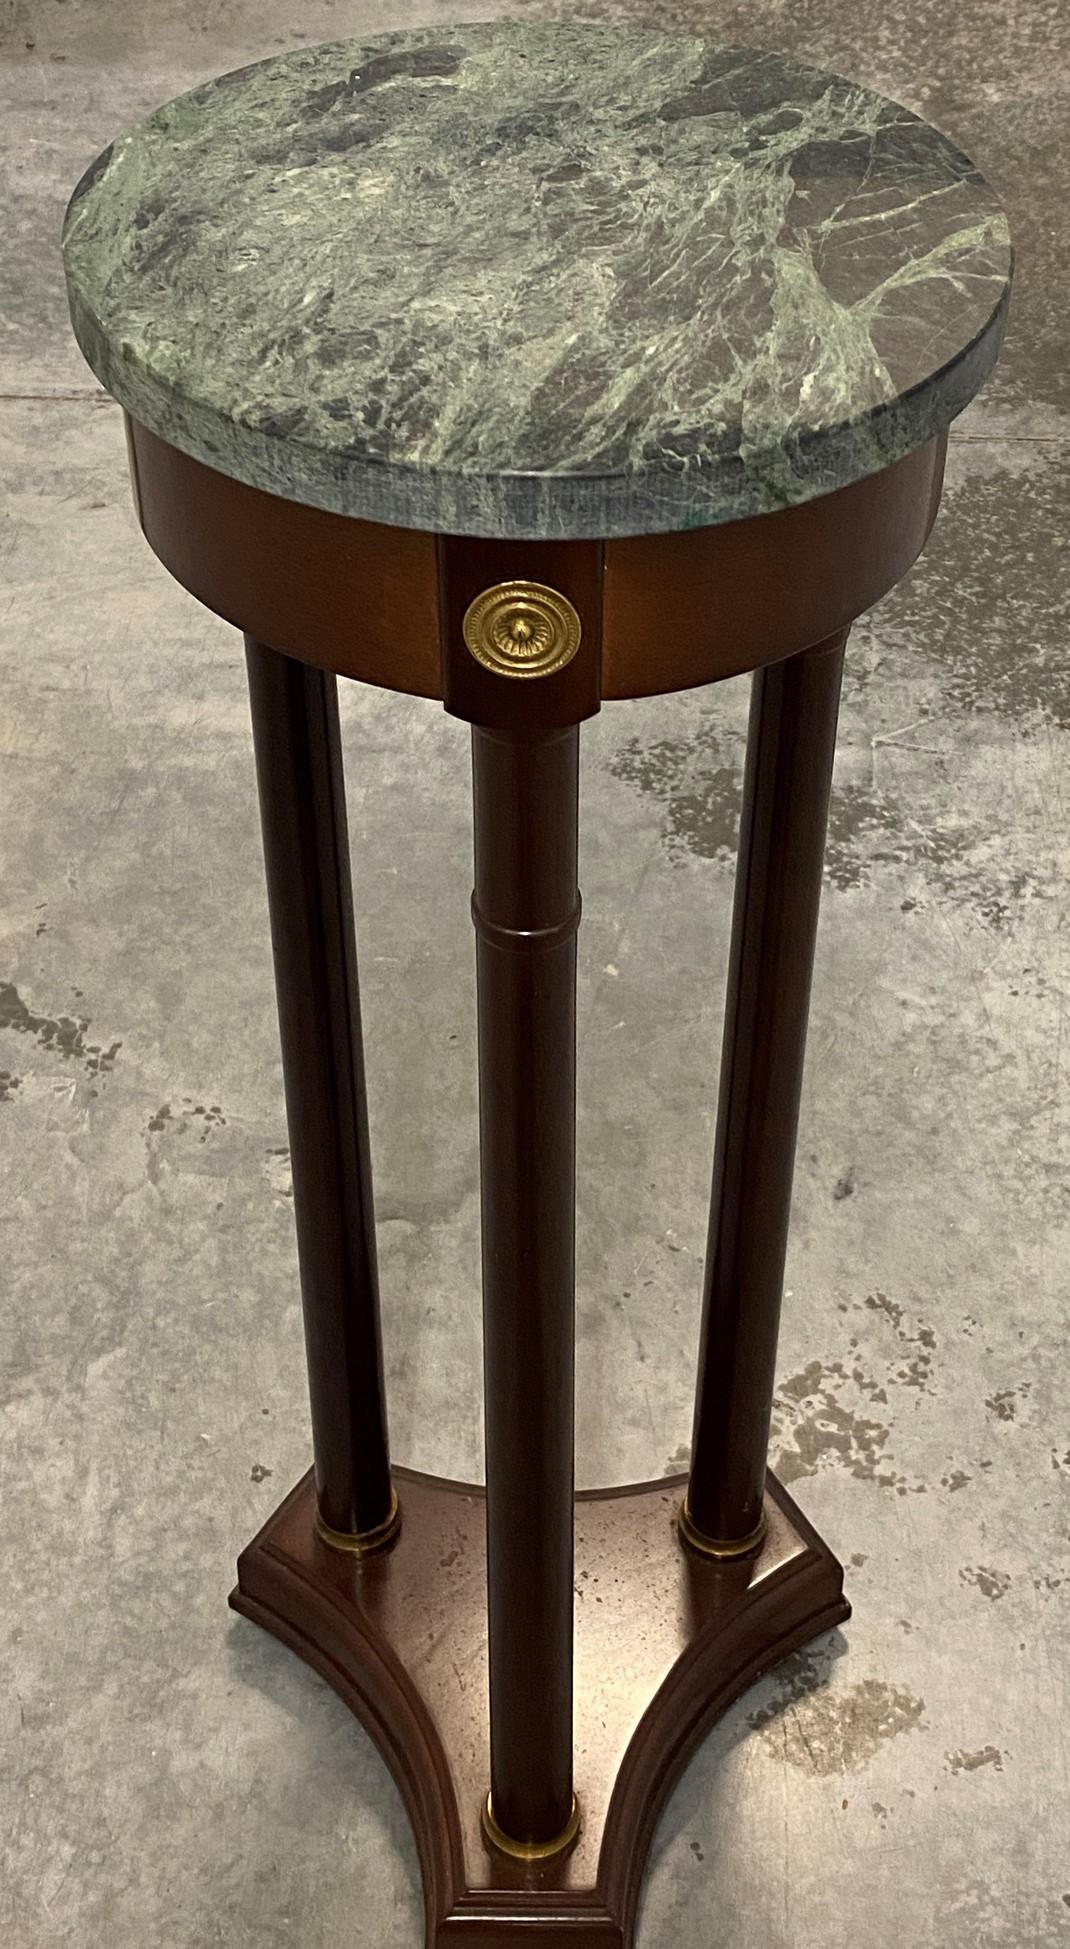 31"H Wood Pedestal with Brass Accents and 11" Round Granite Top